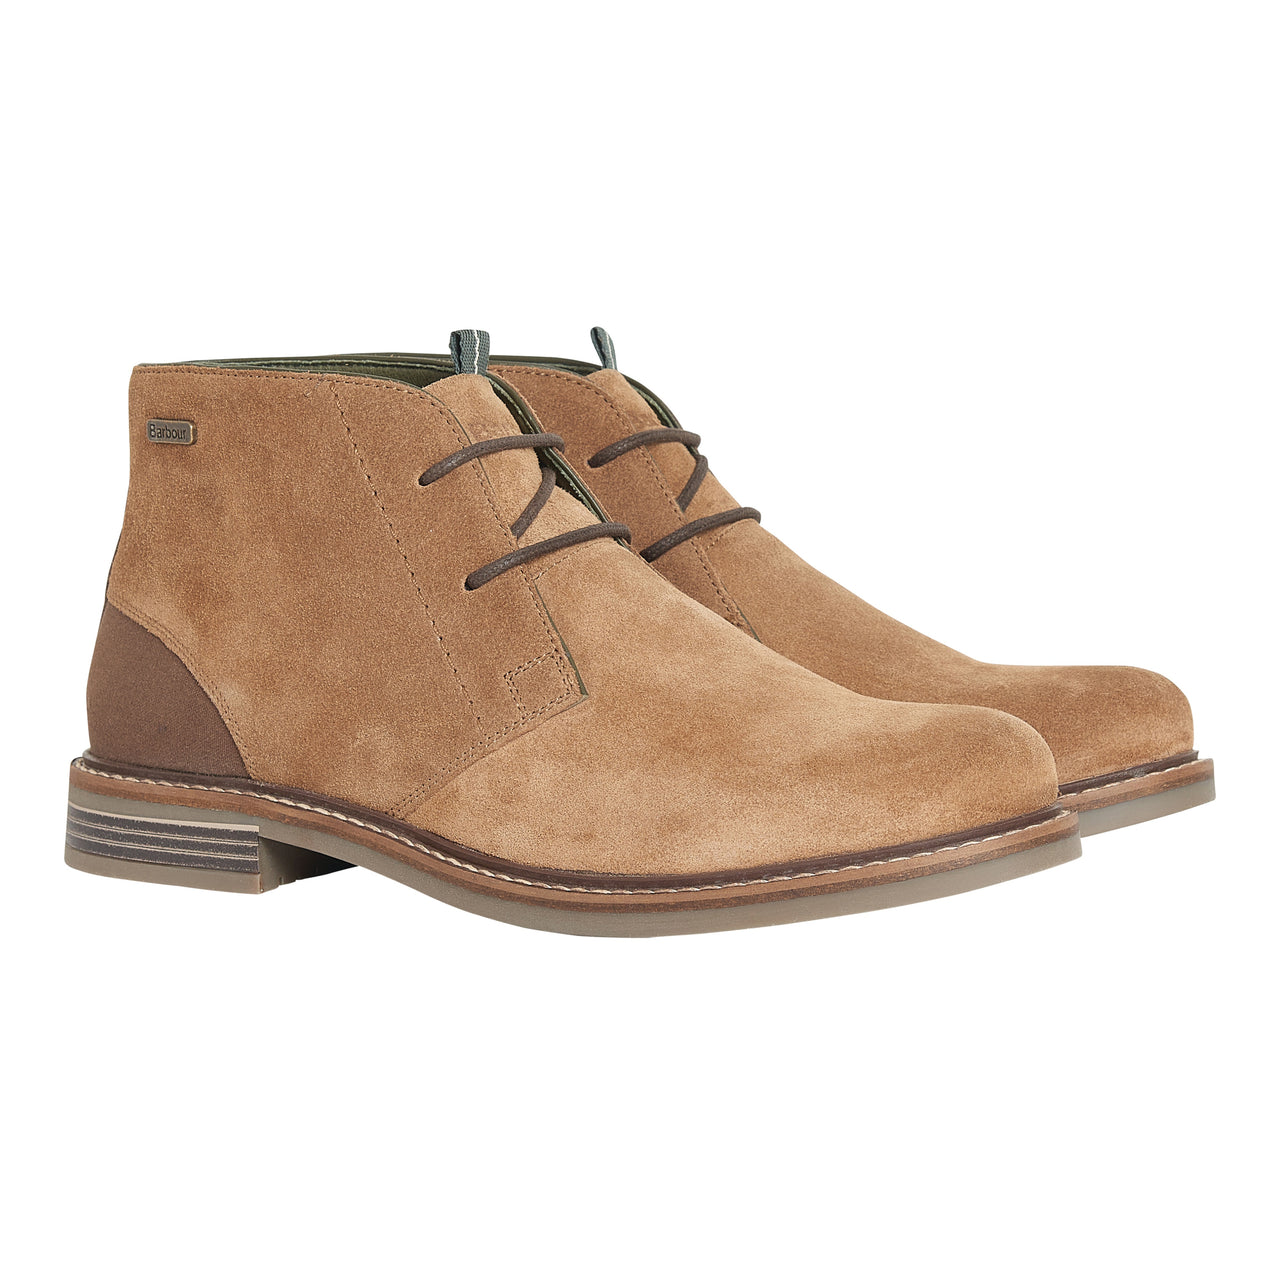 Barbour Readhead Chukka Boots - Fawn Suede